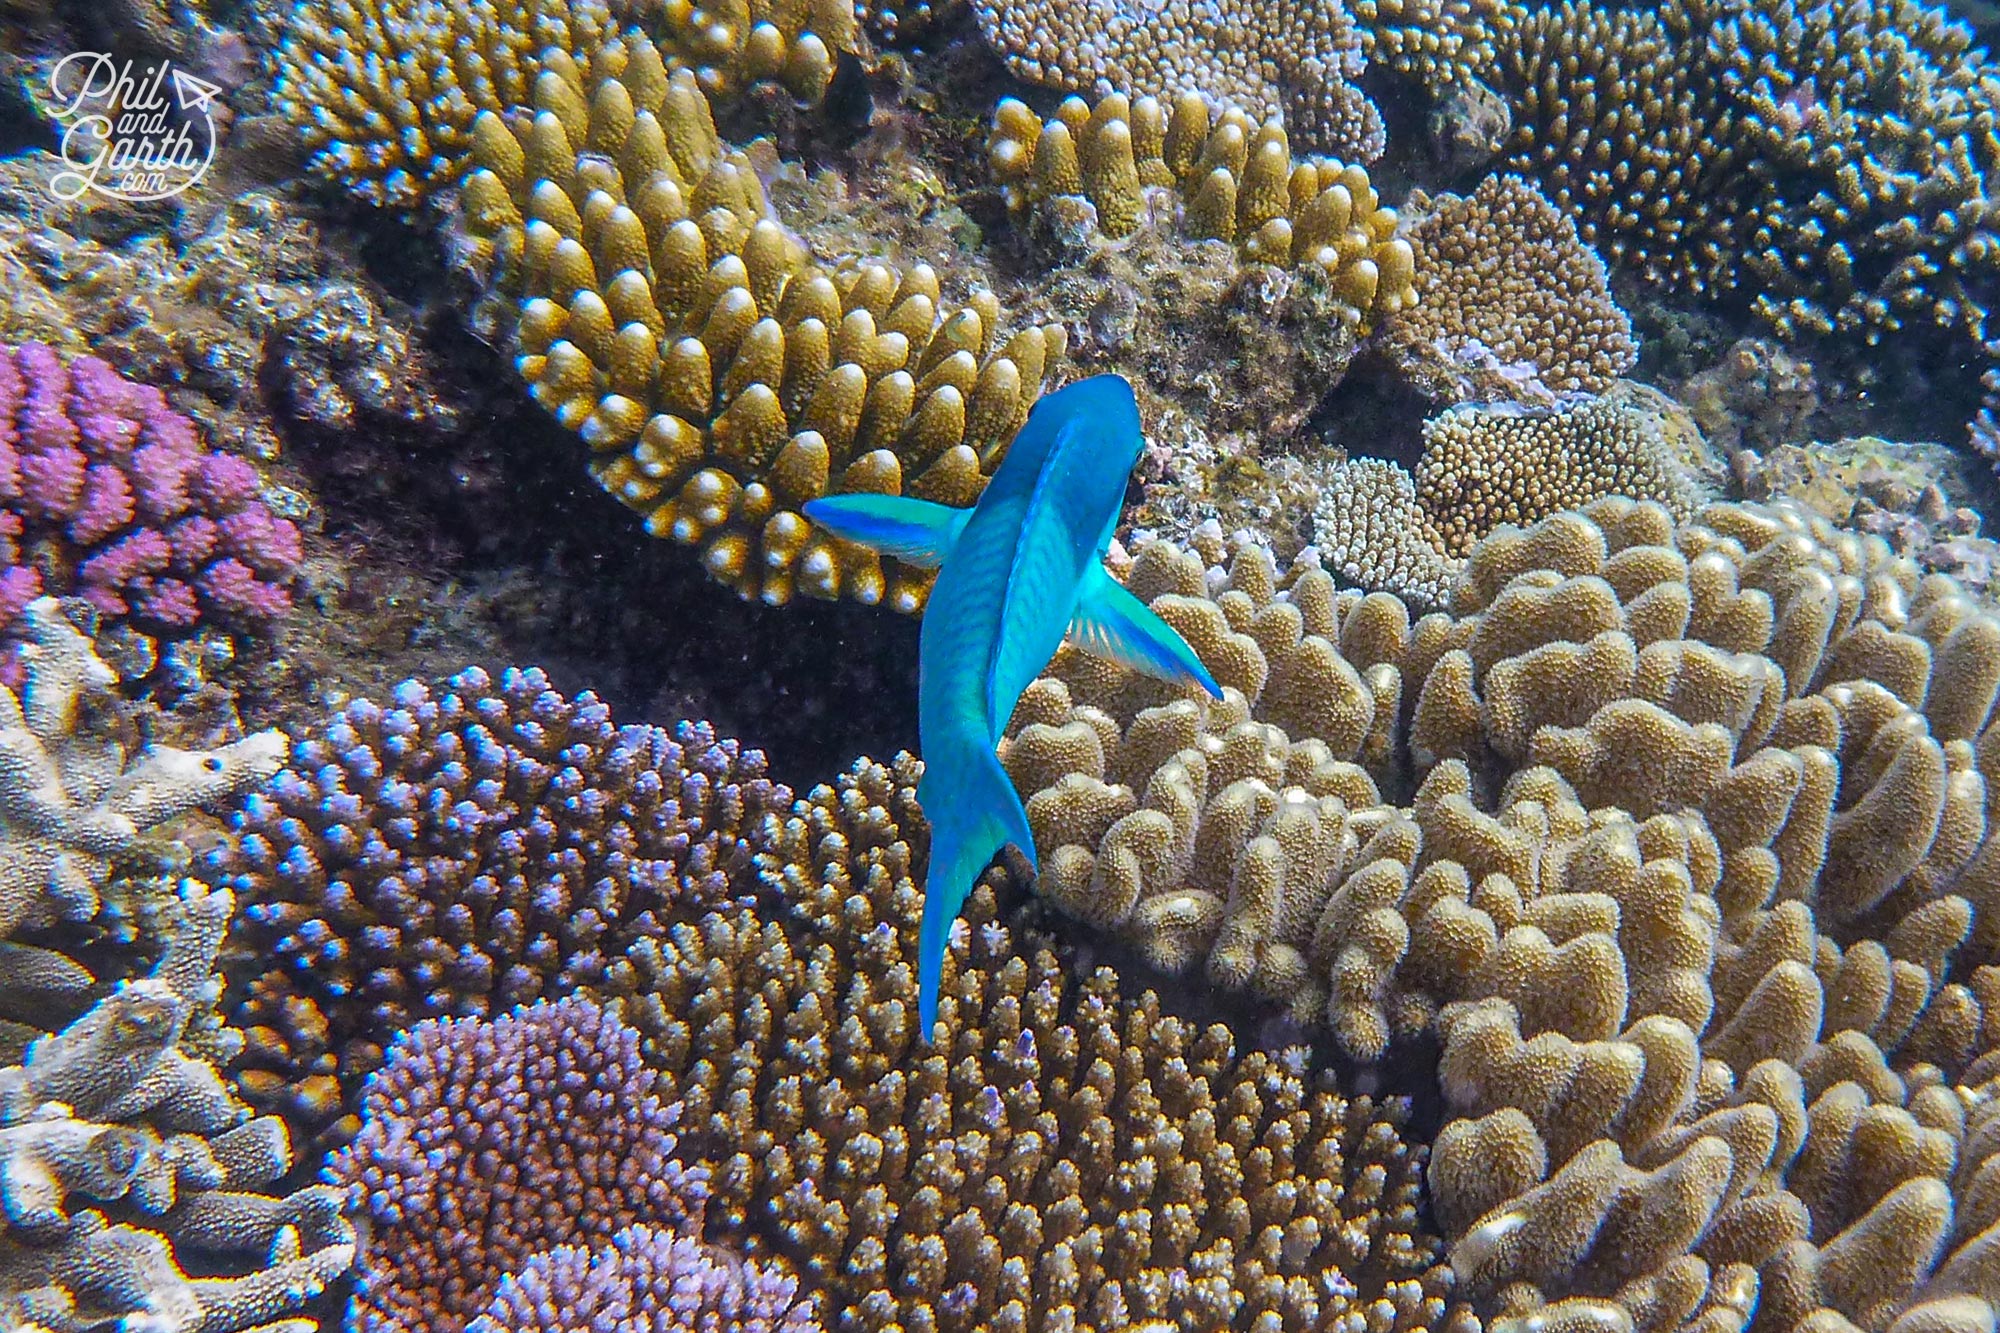 An electric blue fish glides past. Might be a blue parrotfish?